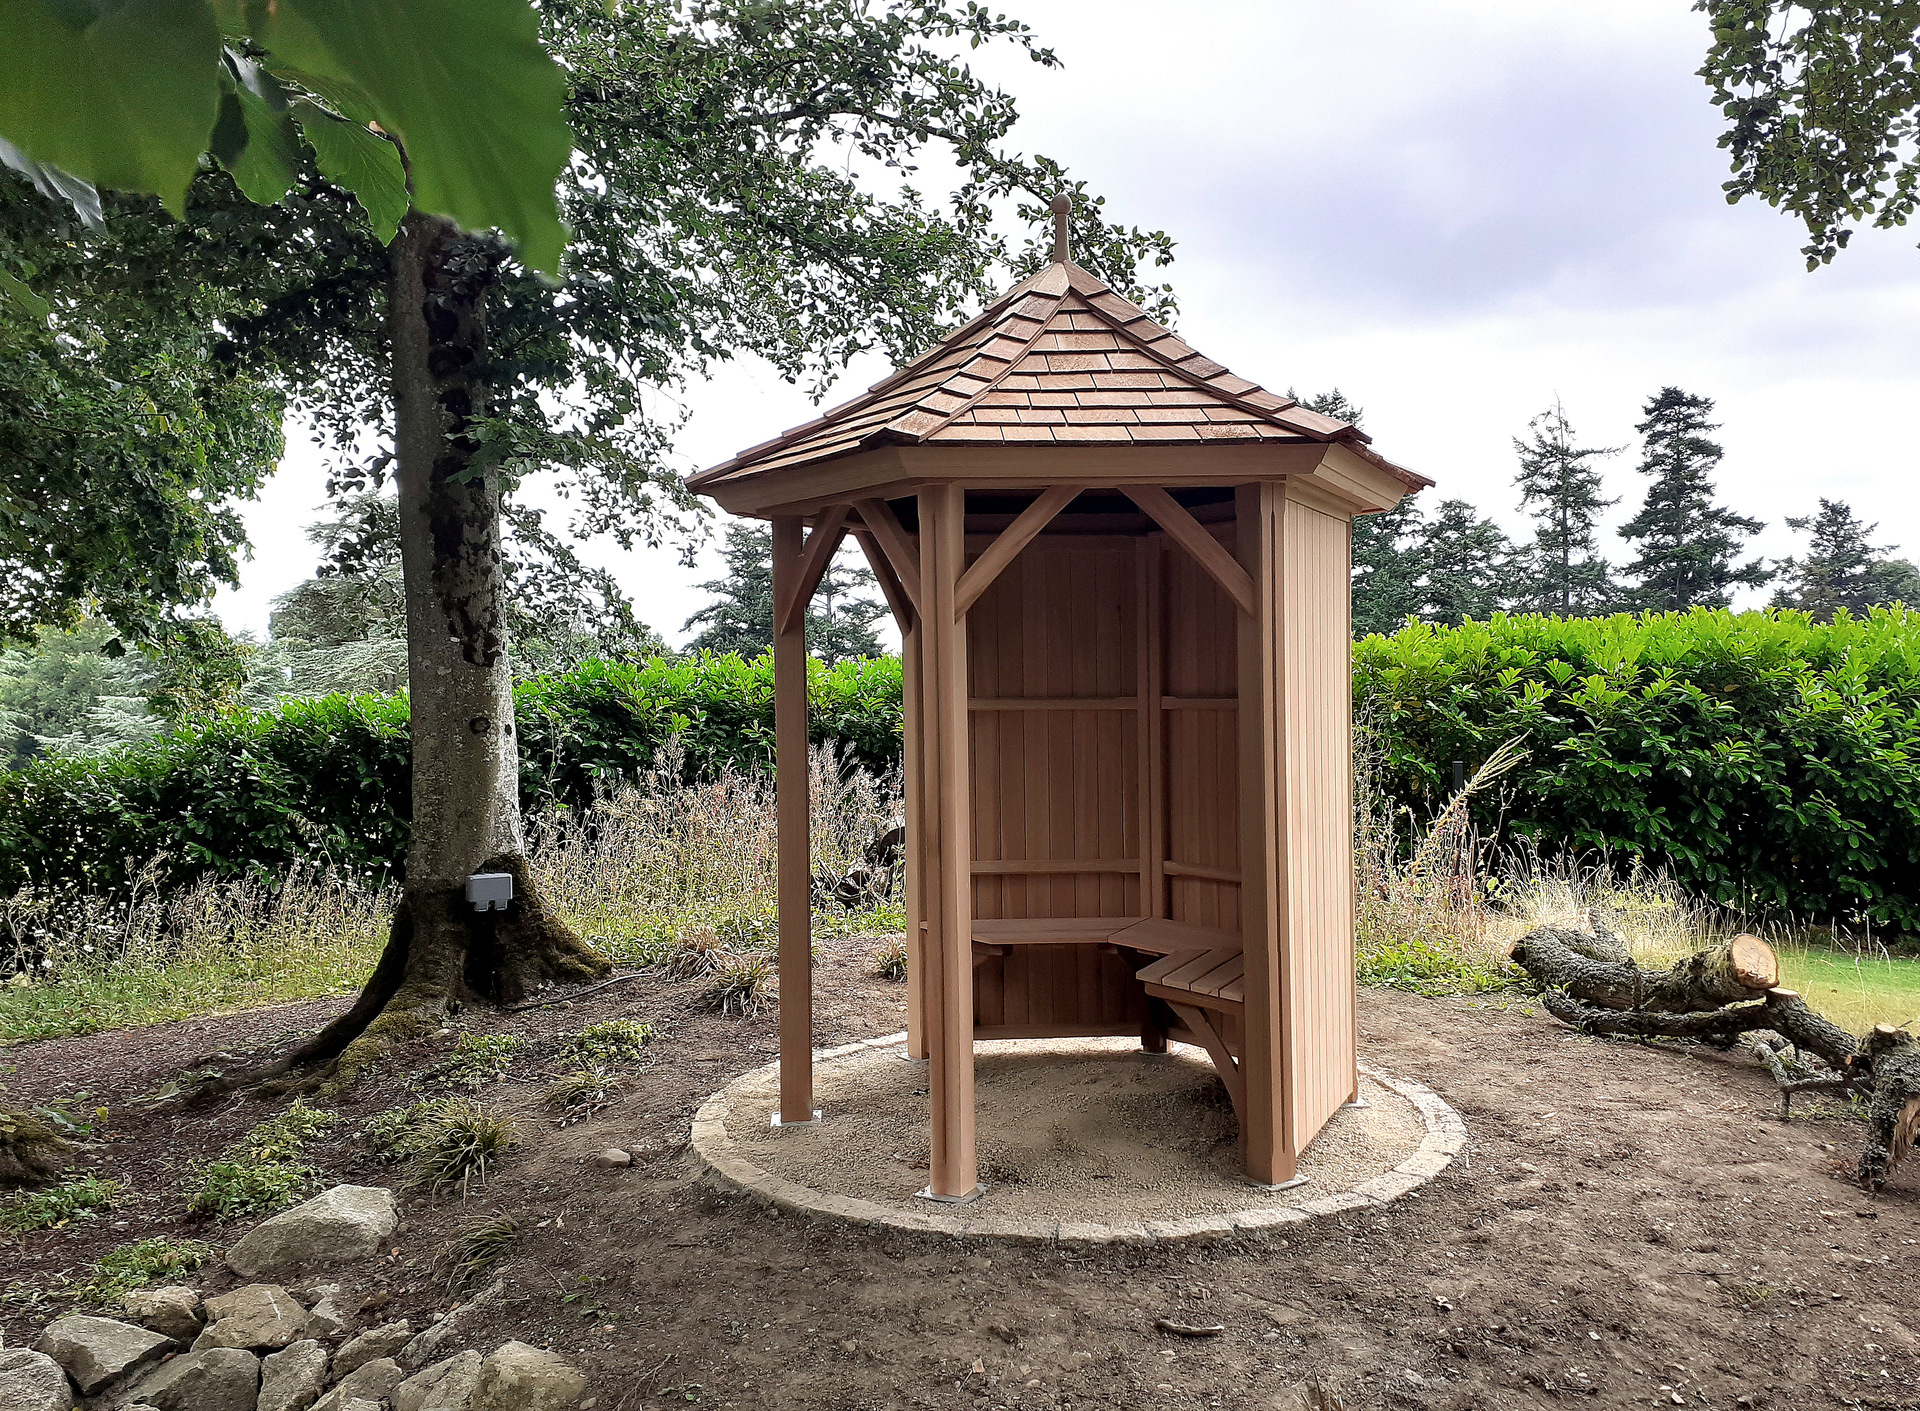 A stunning 1.8m six-sided Garden Gazebo by Victorian Garden Buildings, exceptionally well made in Western Red Cedar, with optional cedar bench. Supplied + Fitted by Owen Chubb Garden Landscapes Limited, in Maynooth, Co Kildare.